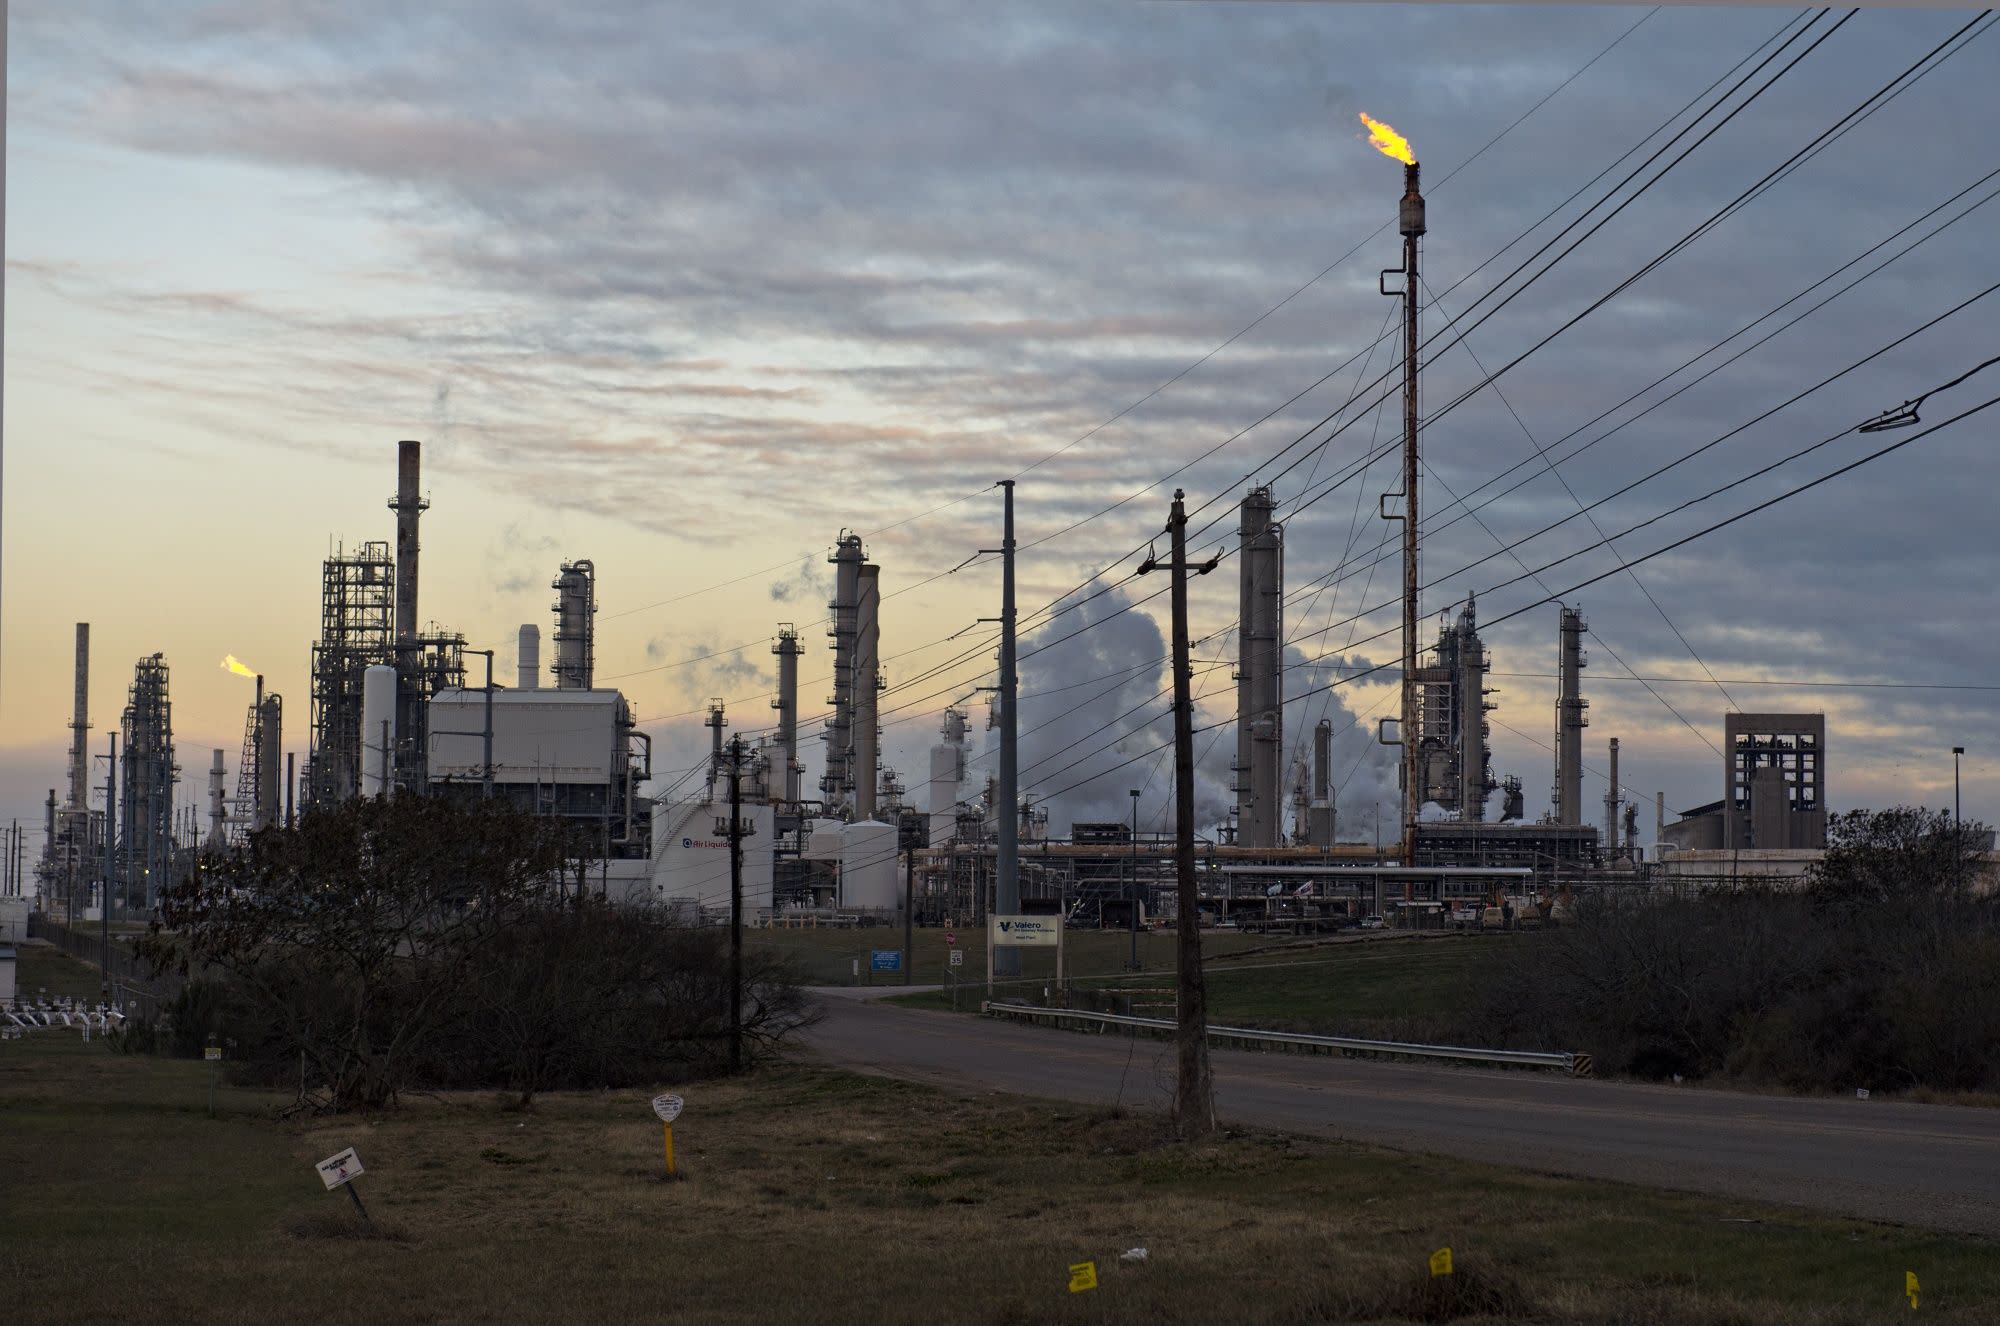 Gas traders begged for money as Texas Cold increased its market